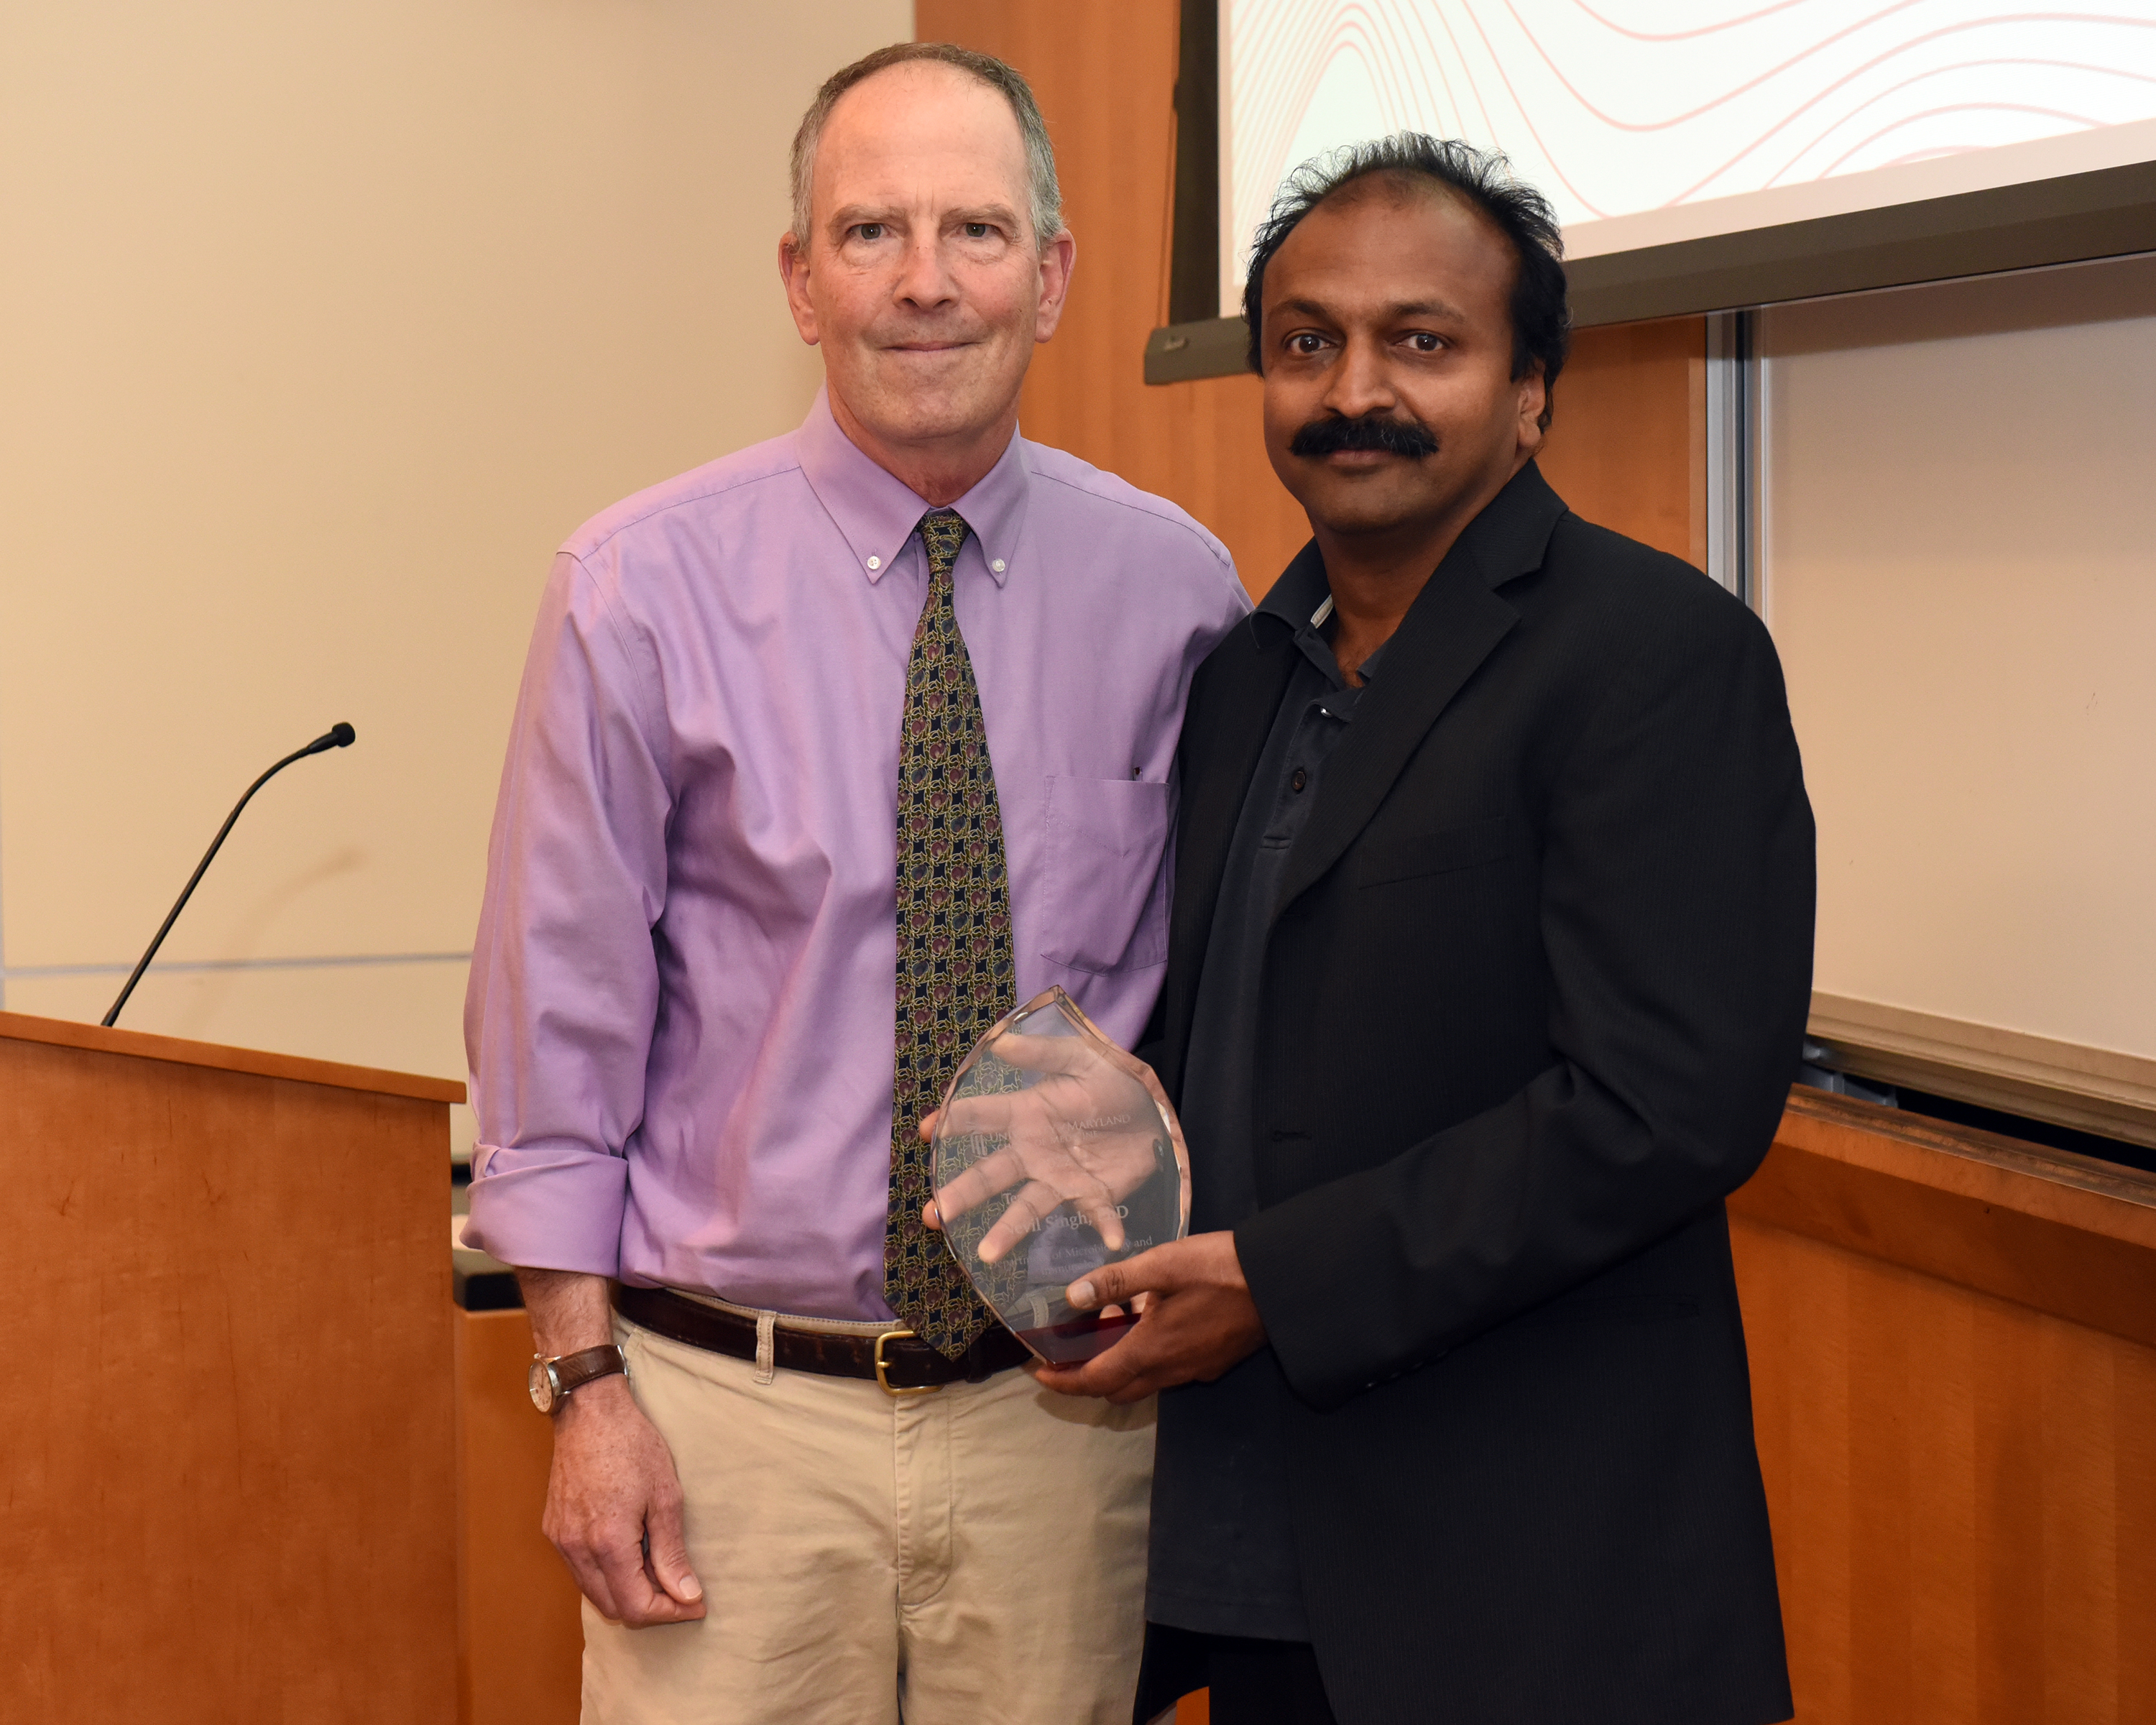 Dr. Bret Hassel, a bald white man wearing a purple shirt and black tie, is standing next to Dr. Nevil Singh, an Indian man with black hair and a mustache wearing a black suit and black shirt holding his award and smiling.